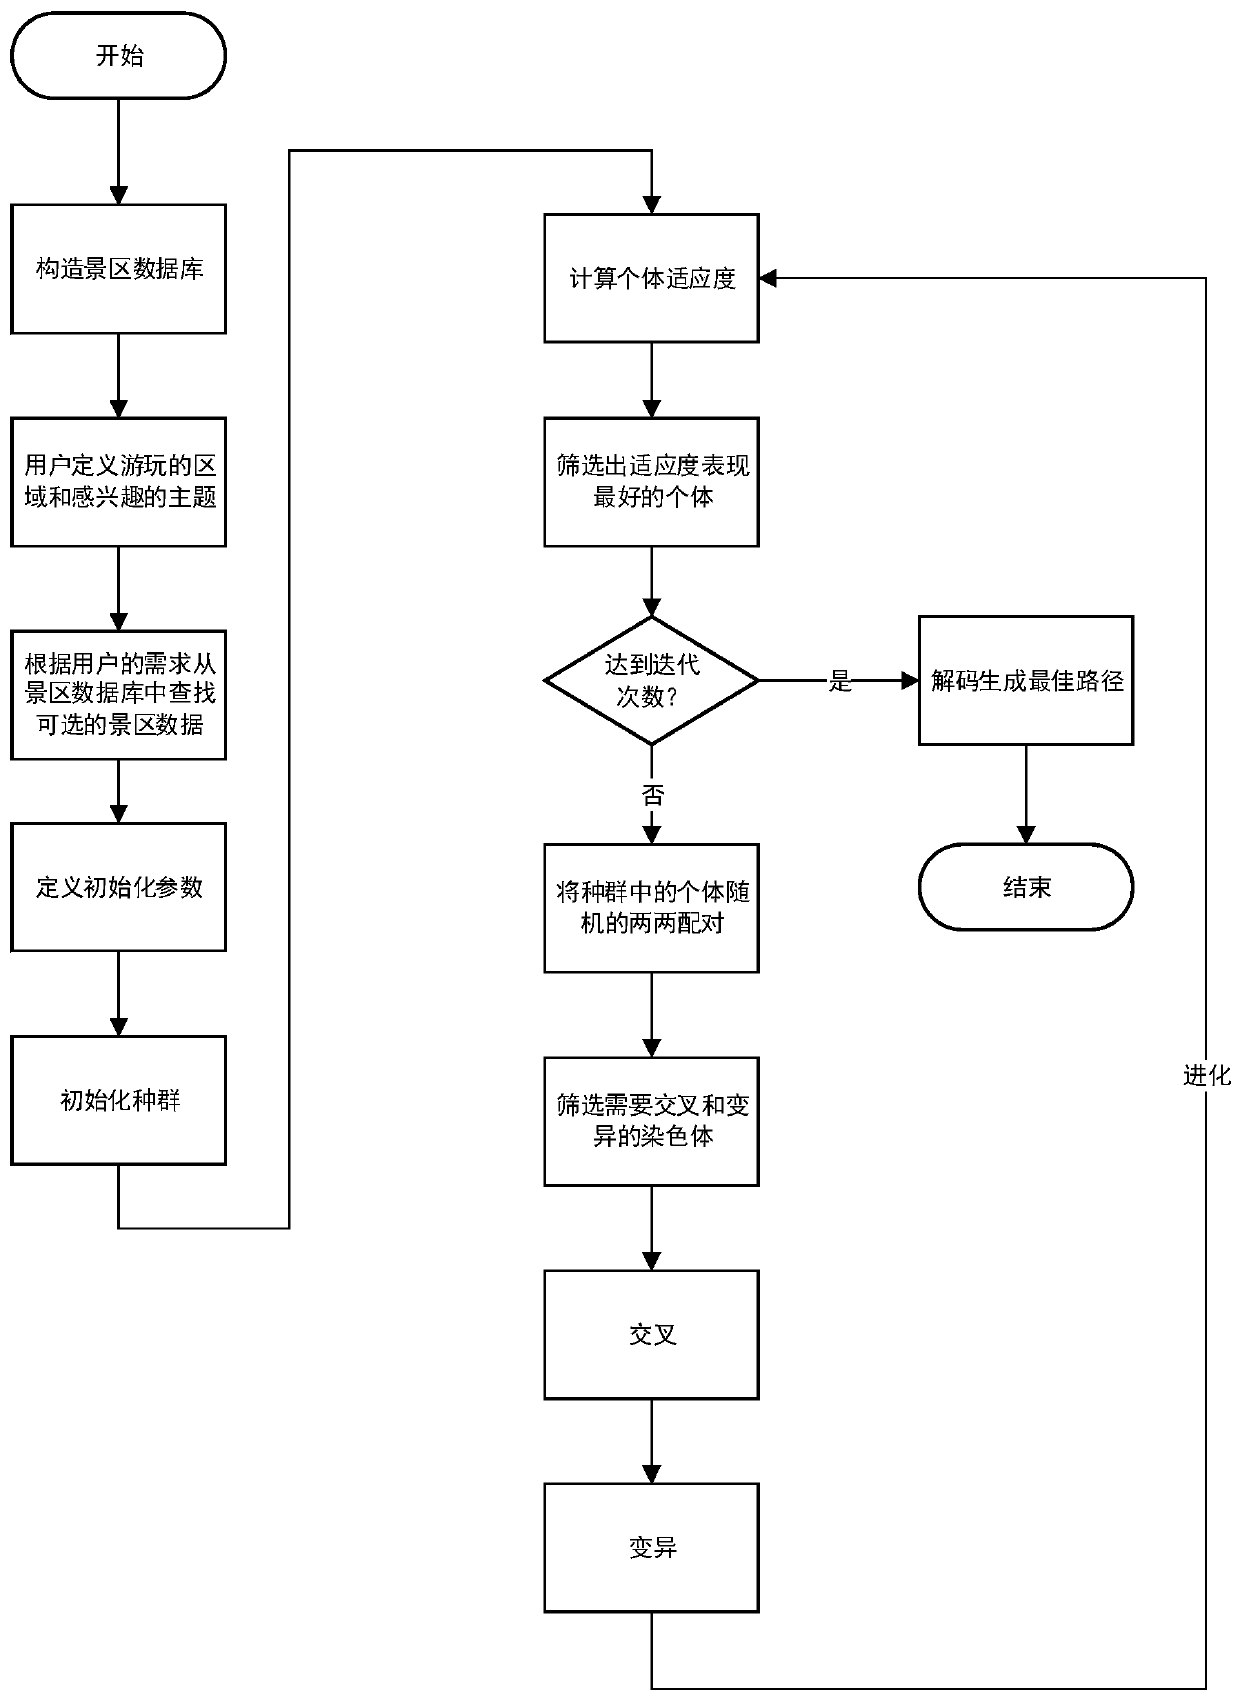 Travel route planning method and system based on microbial genetic algorithm